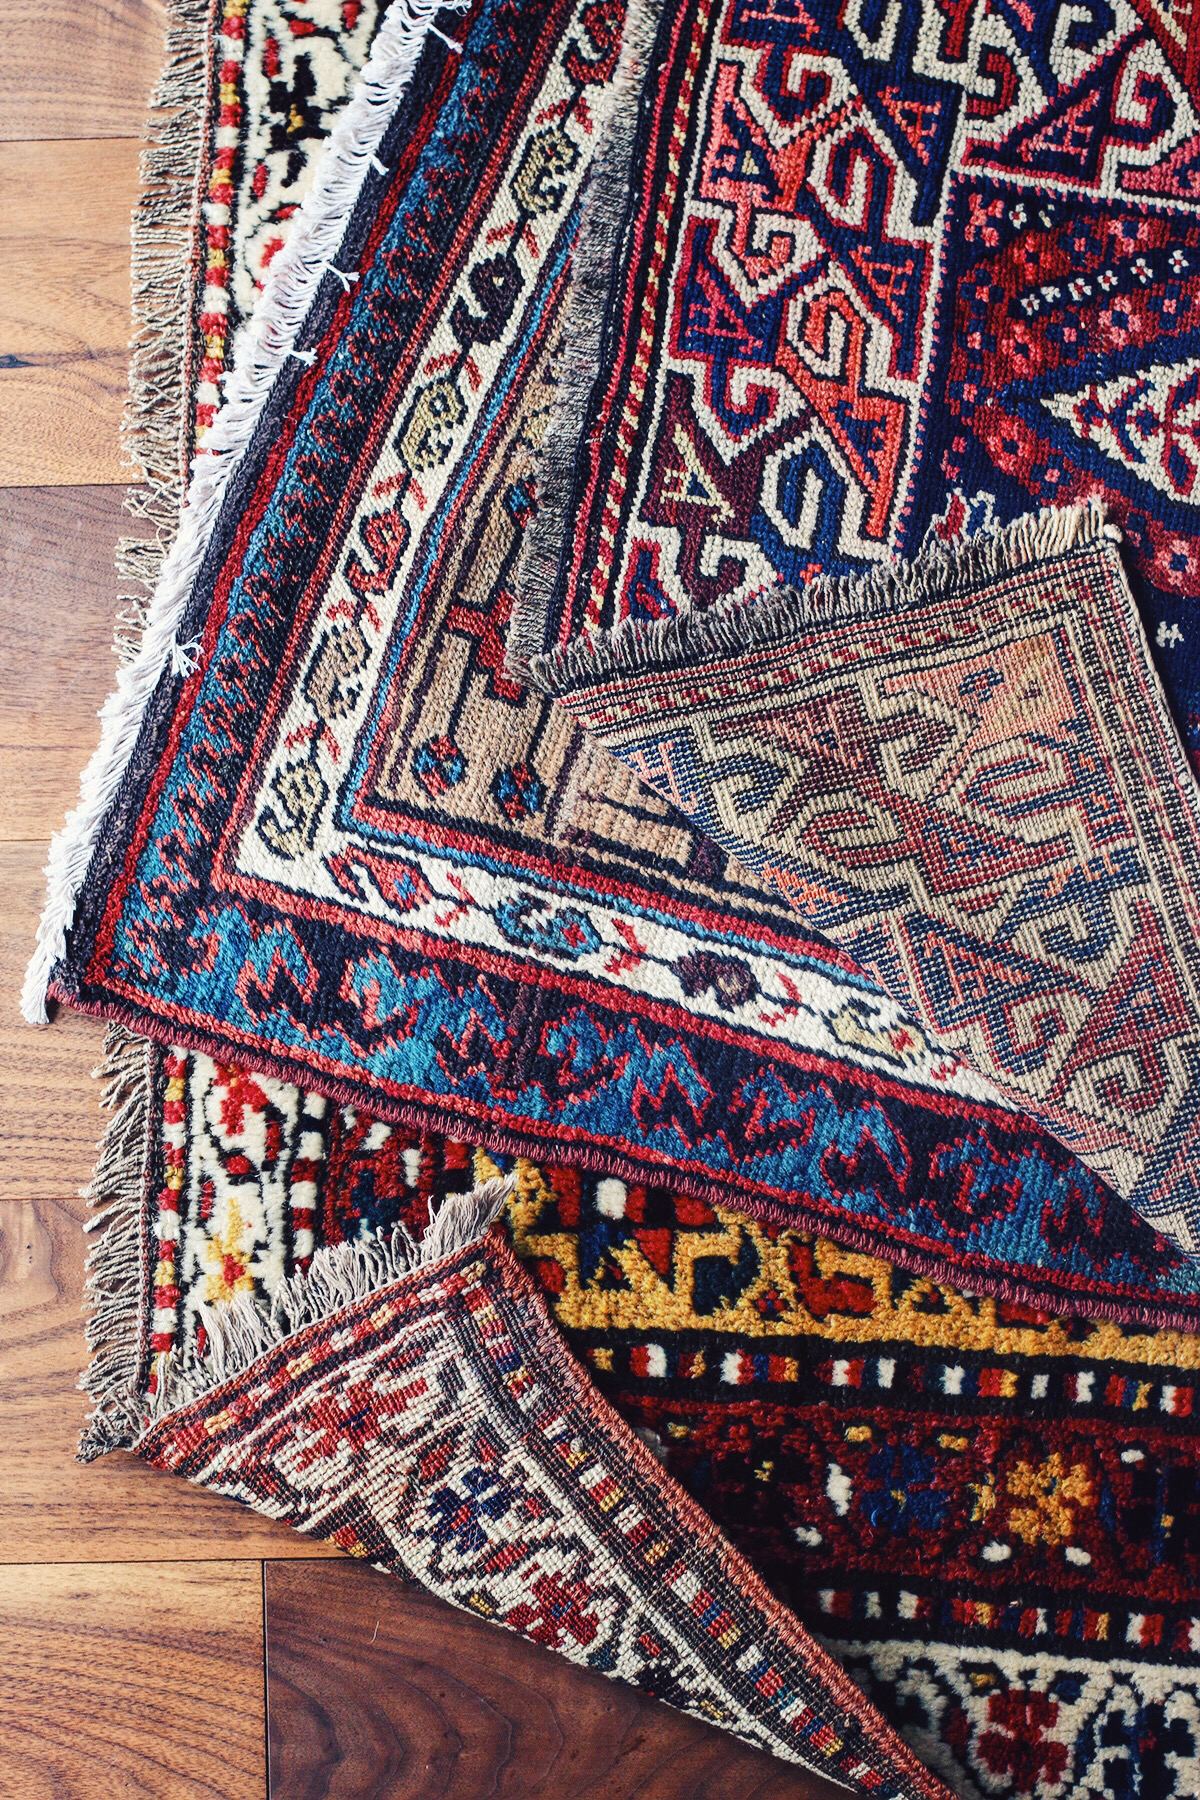 Finding The Right Antique Rug - Honestly WTF